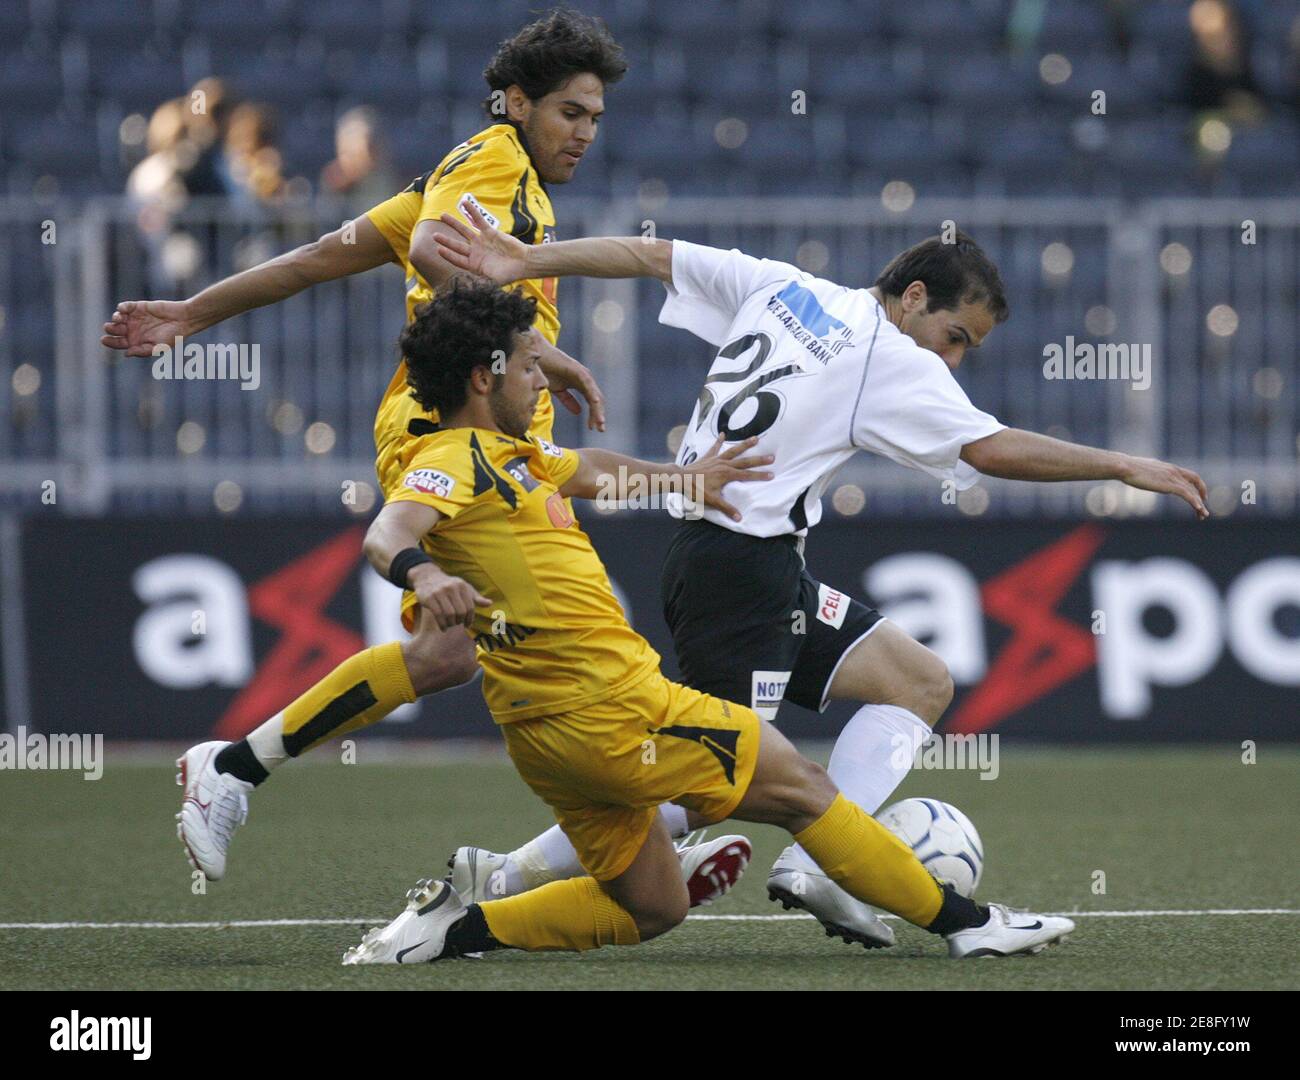 BSC Young Boys' Davide Chiumiento (front) and Marcos Dos Santos (back) challenges FC Aarau's Hocine Achiou (R) during their Swiss Super League soccer match in Bern April 14, 2007. REUTERS/Pascal Lauener (SWITZERLAND) Stock Photo